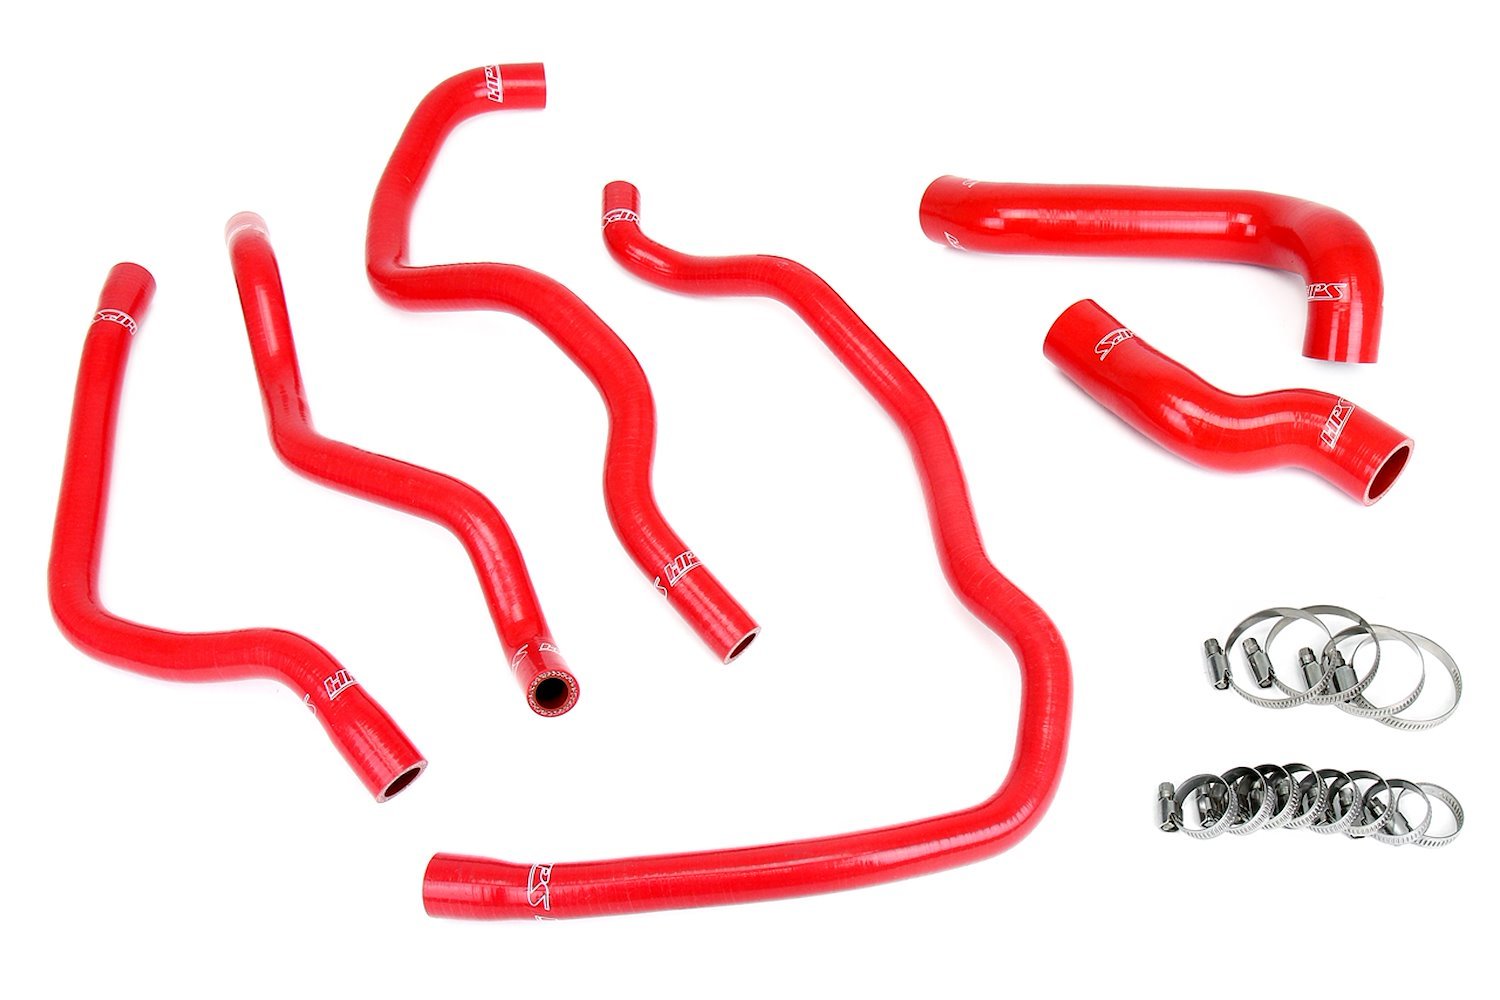 57-2076-RED Radiator and Heater Hose Kit, 3-Ply Reinforced Silicone, Replaces Rubber Radiator & Heater Hoses